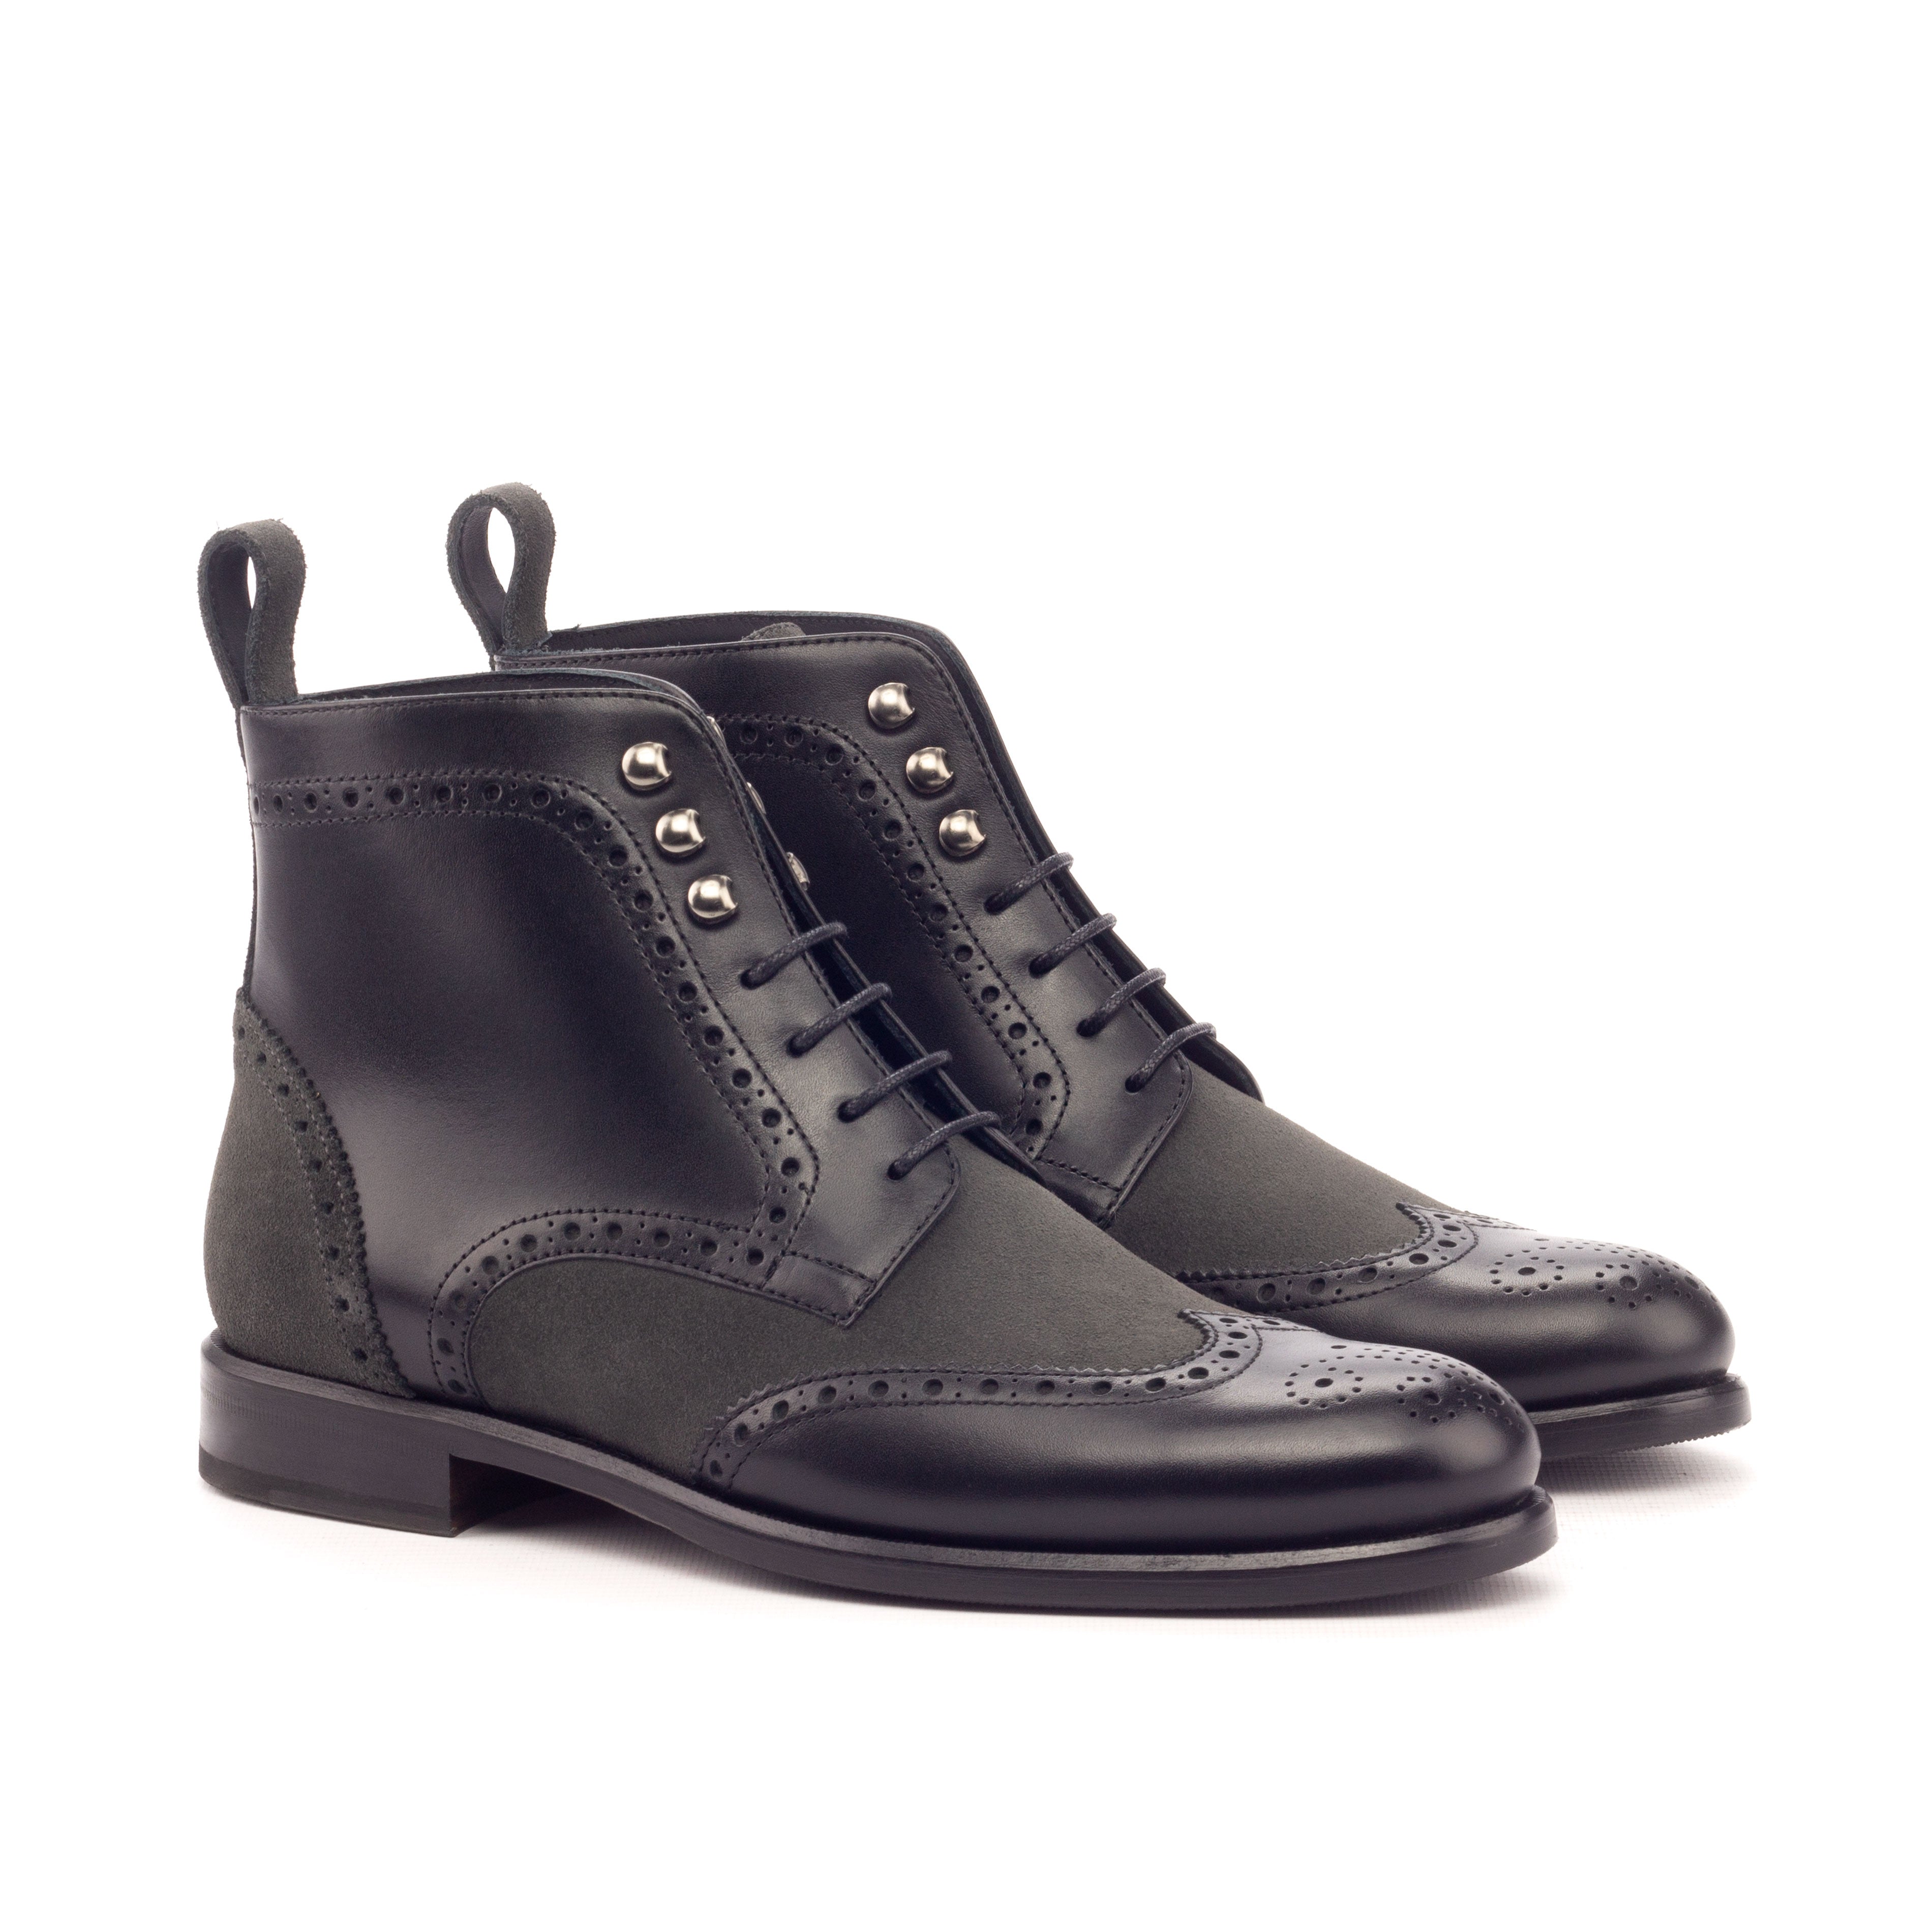 Black Calf with Grey Suede Military Boot